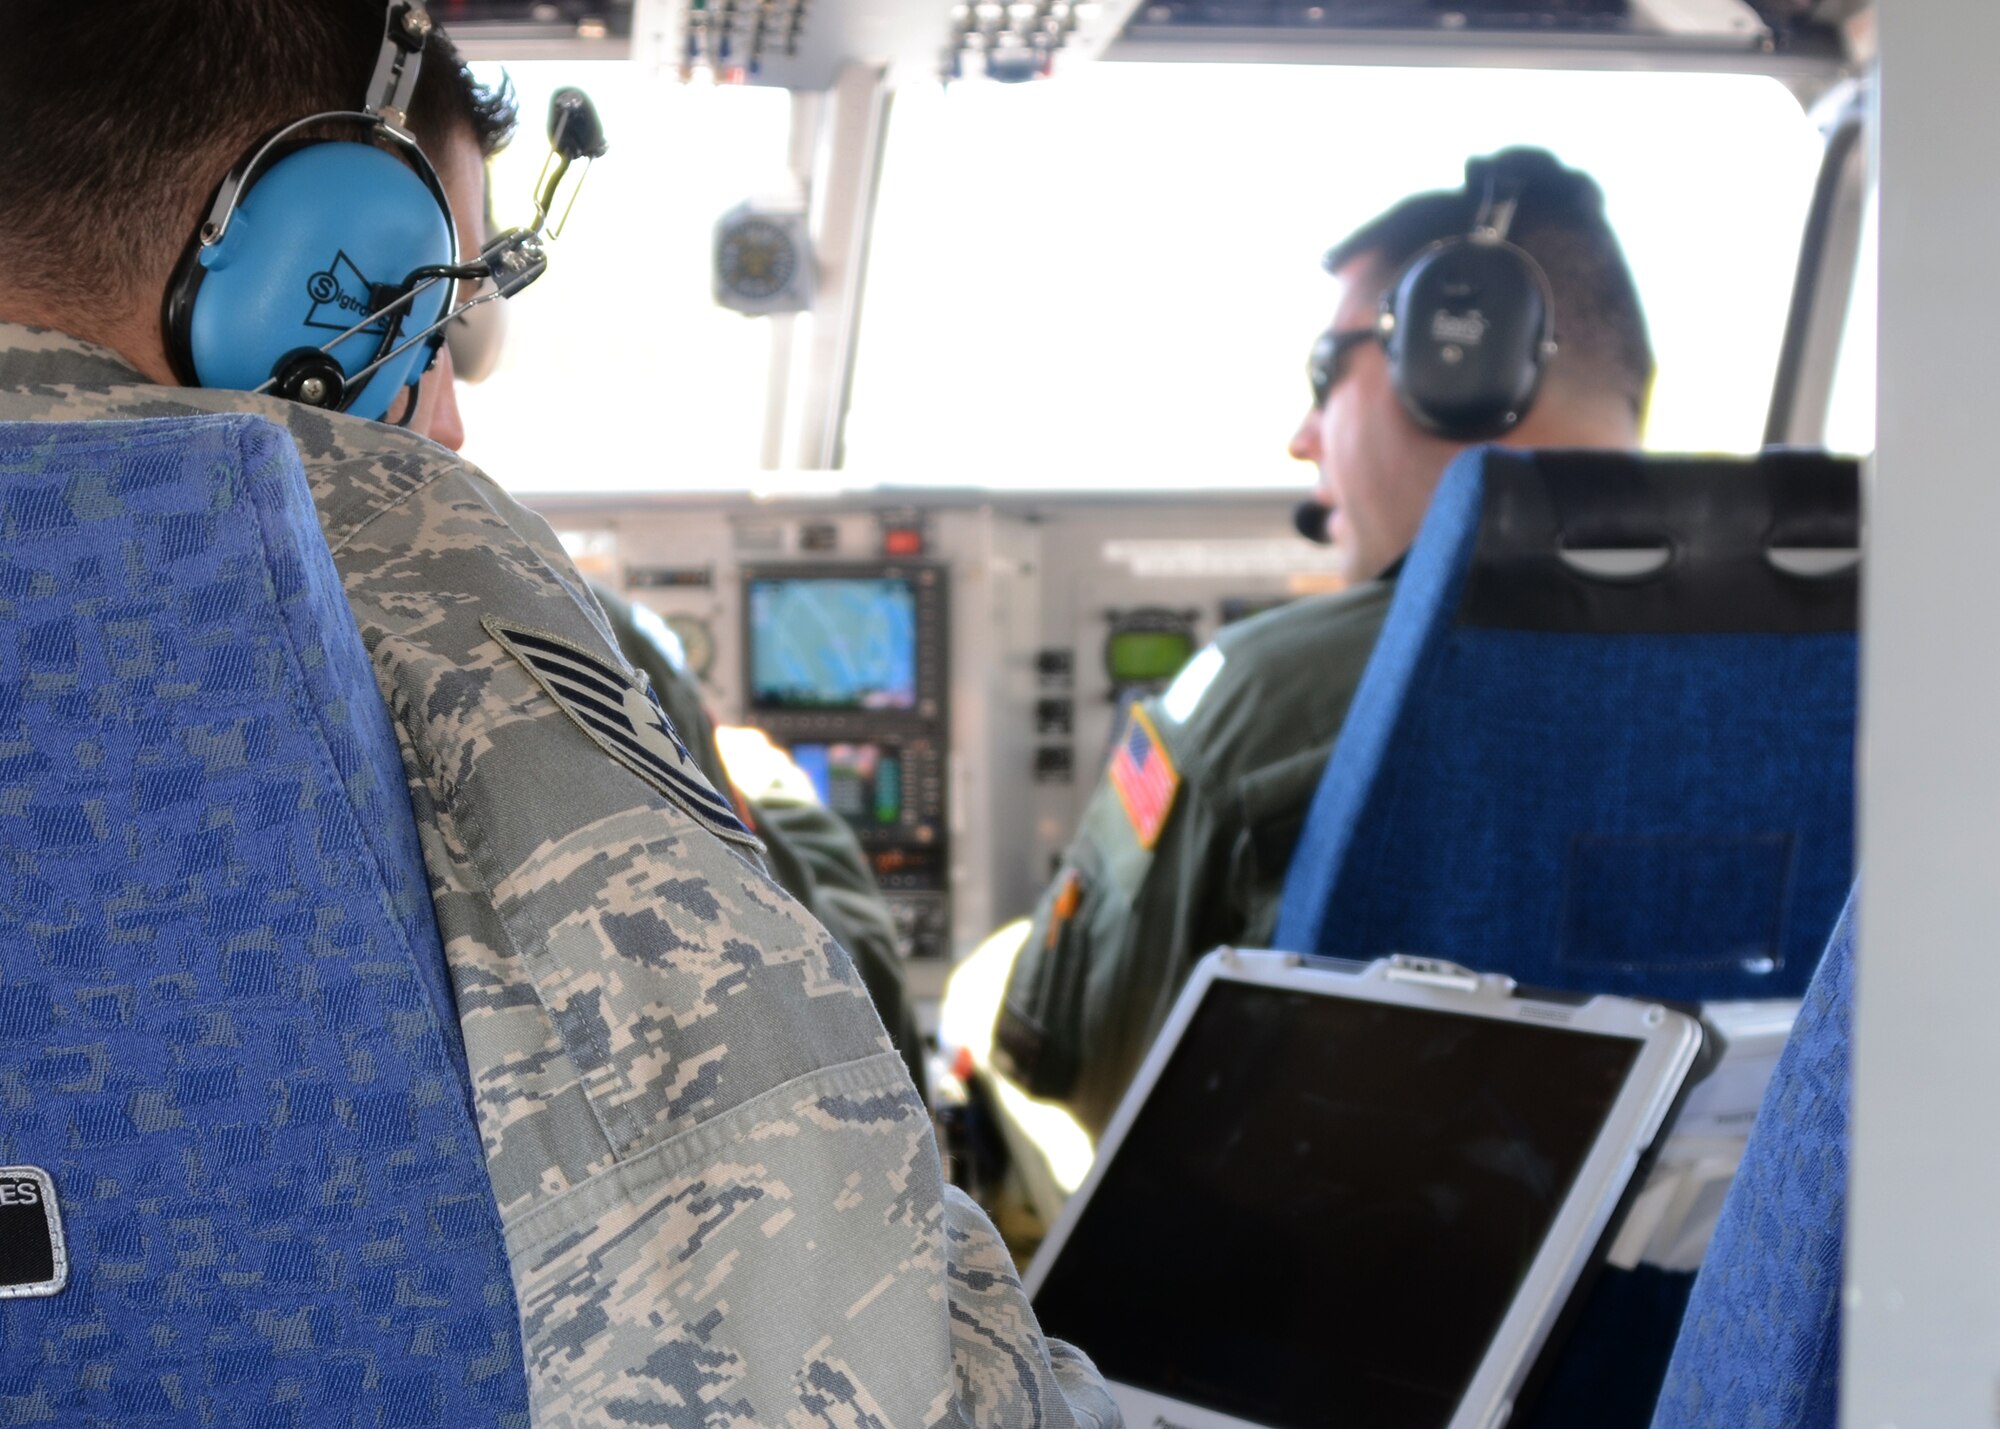 U.S. Air Force Tech. Sgt. Elvis Parlar, a Geospatial Information Interoperability Exploitation-Portable (GIIEP) operator from the 175th Wing Communication Squadron, Maryland Air National Guard, operates a camera transmitting real time images on April 13, 2012 while members of the Maryland Wing Civil Air Patrol fly a GA-8 aircraft from Warfield Air National Guard Base, Baltimore, MD. The GIIEP system gives incident commanders on the ground images in emergency situations and the Air and Army National Guard work with the CAP in operating the system. (National Guard Photo By Master Sgt. Ed Bard/RELEASED)